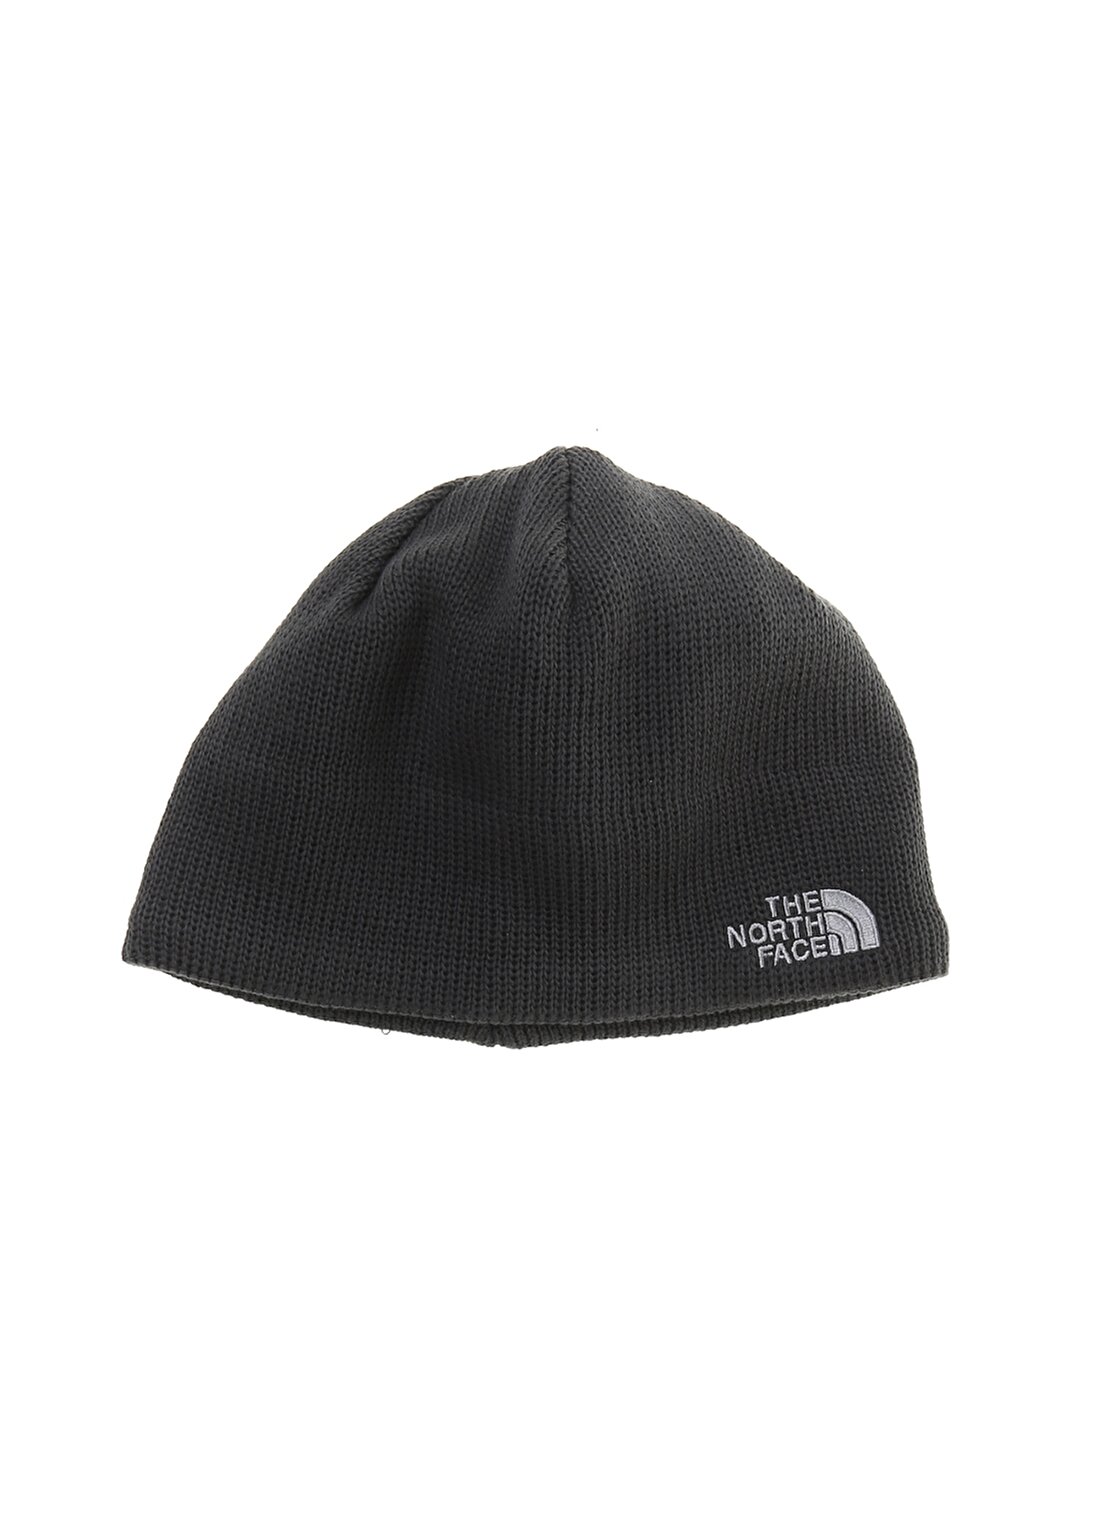 The North Face NF0A3FNS0C51 Bones Recycled Beanie Bere